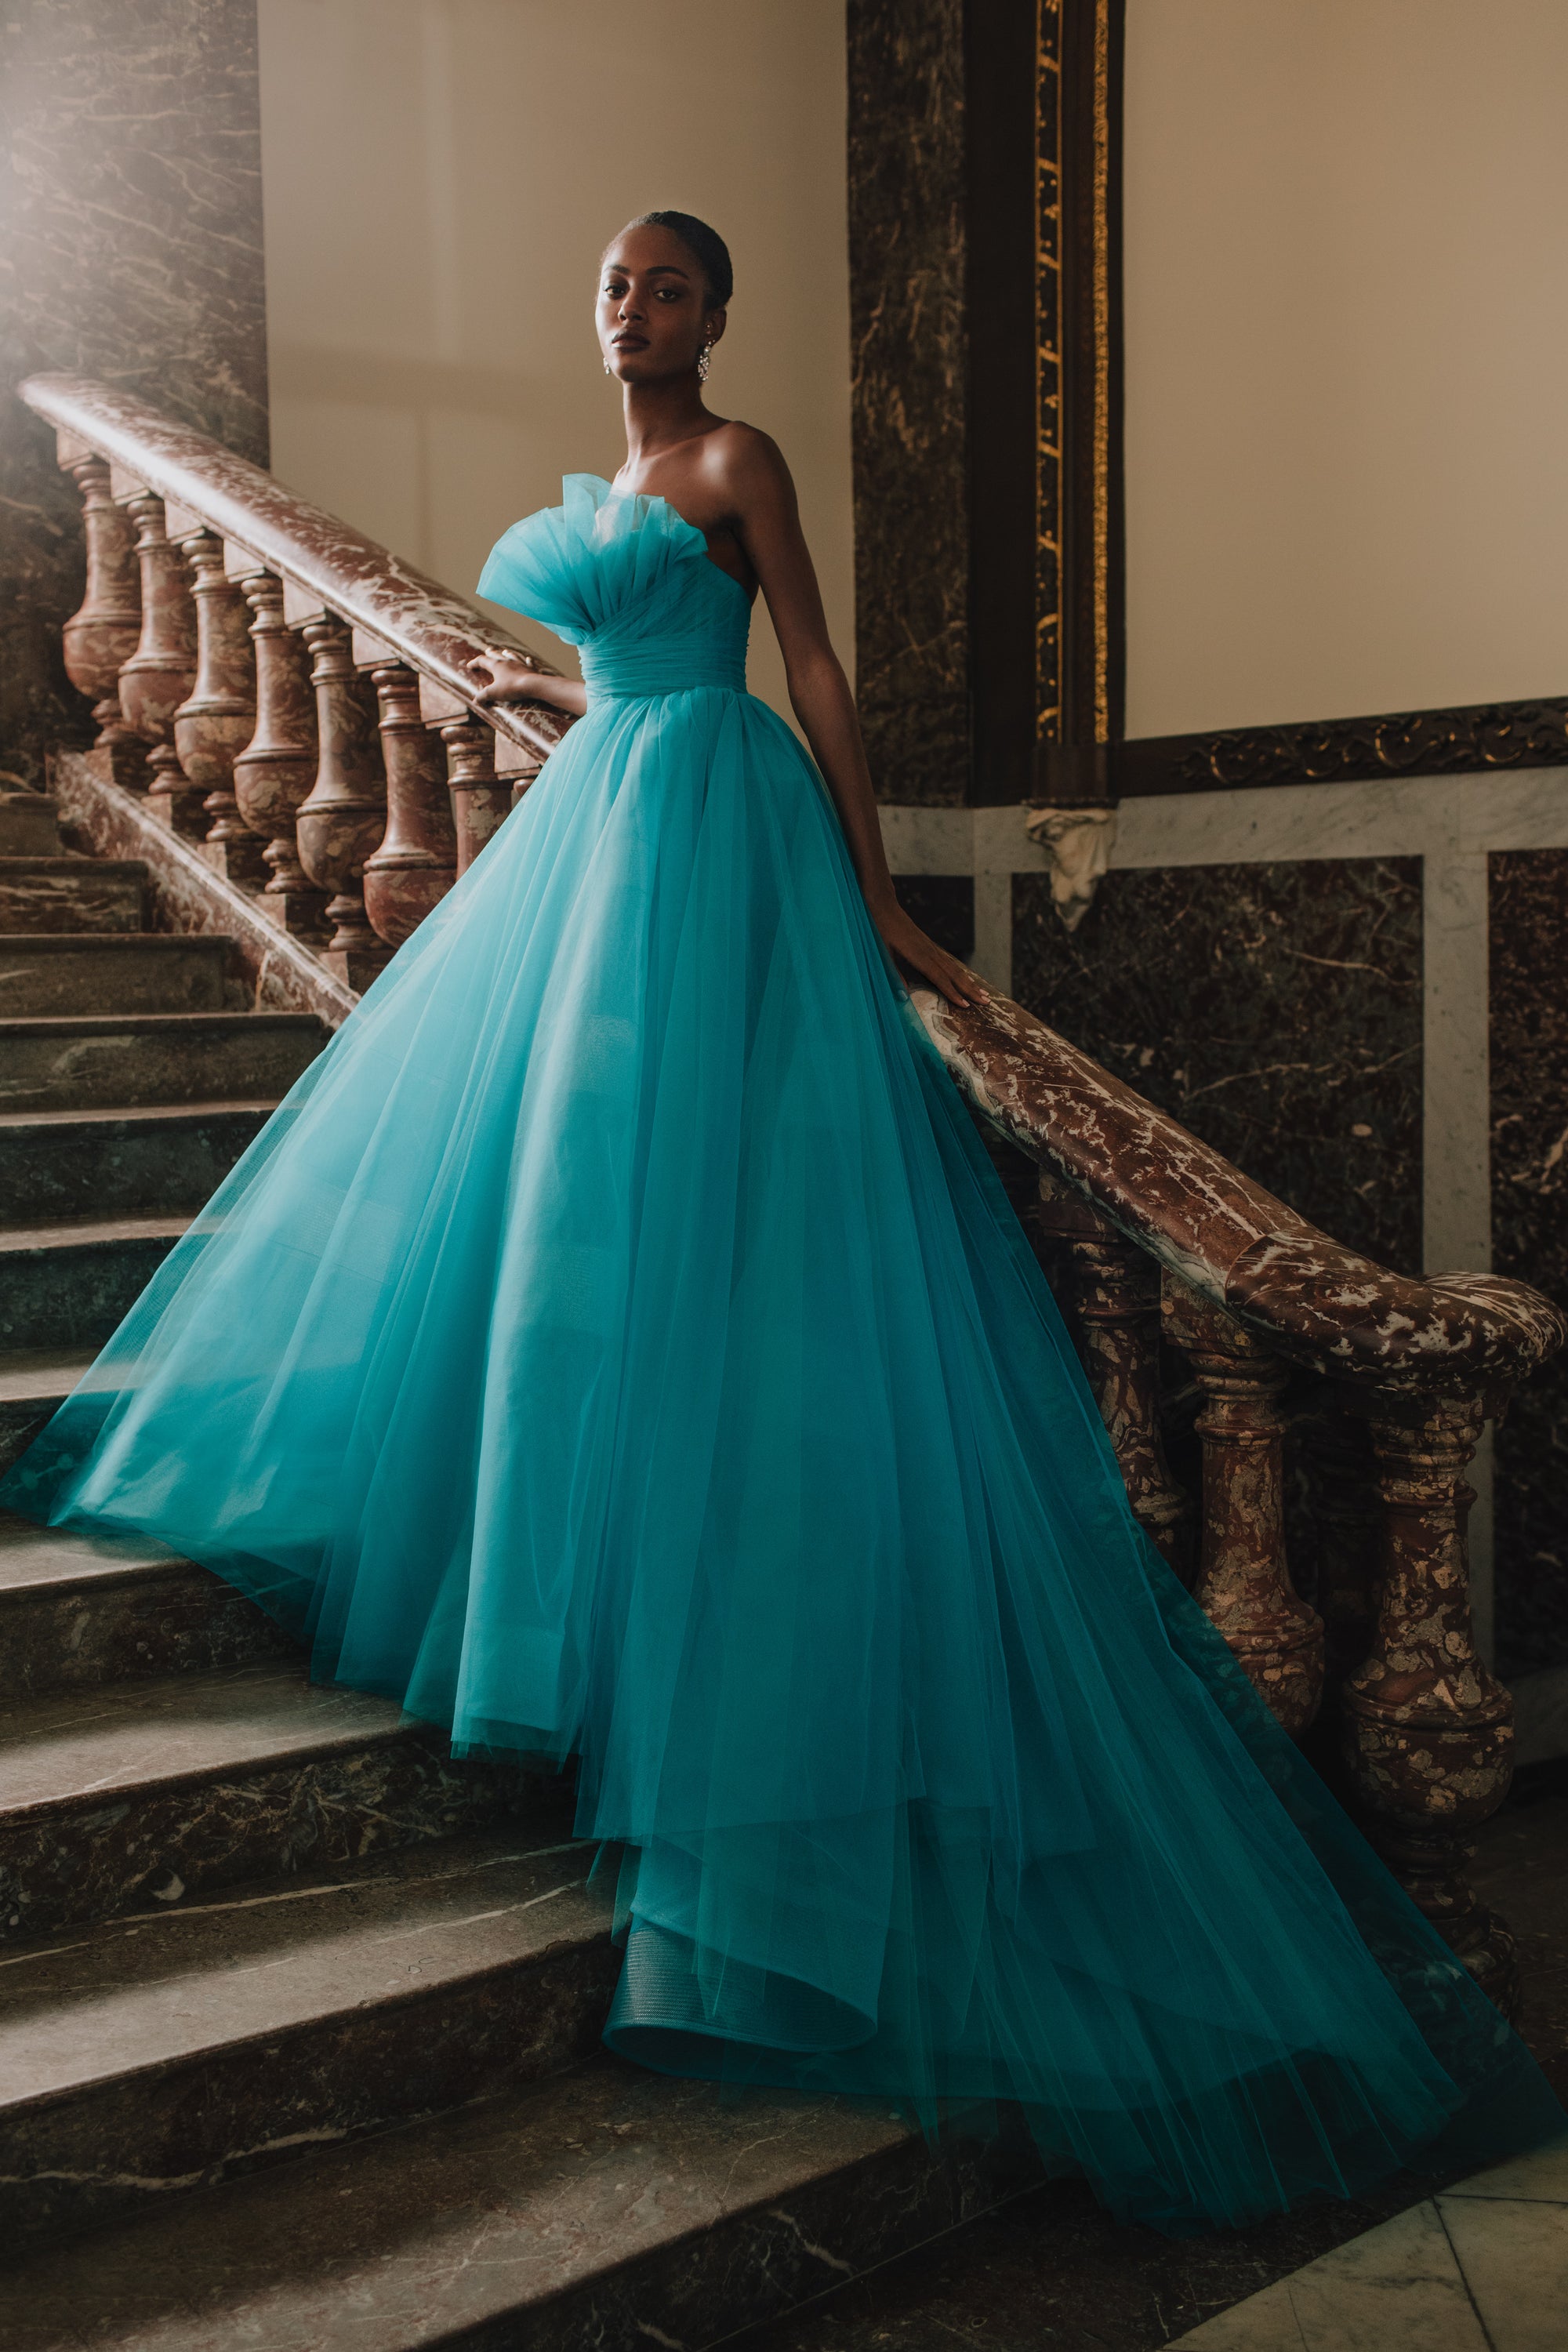 Monique Lhuillier Strapless Tulle Ball Gown